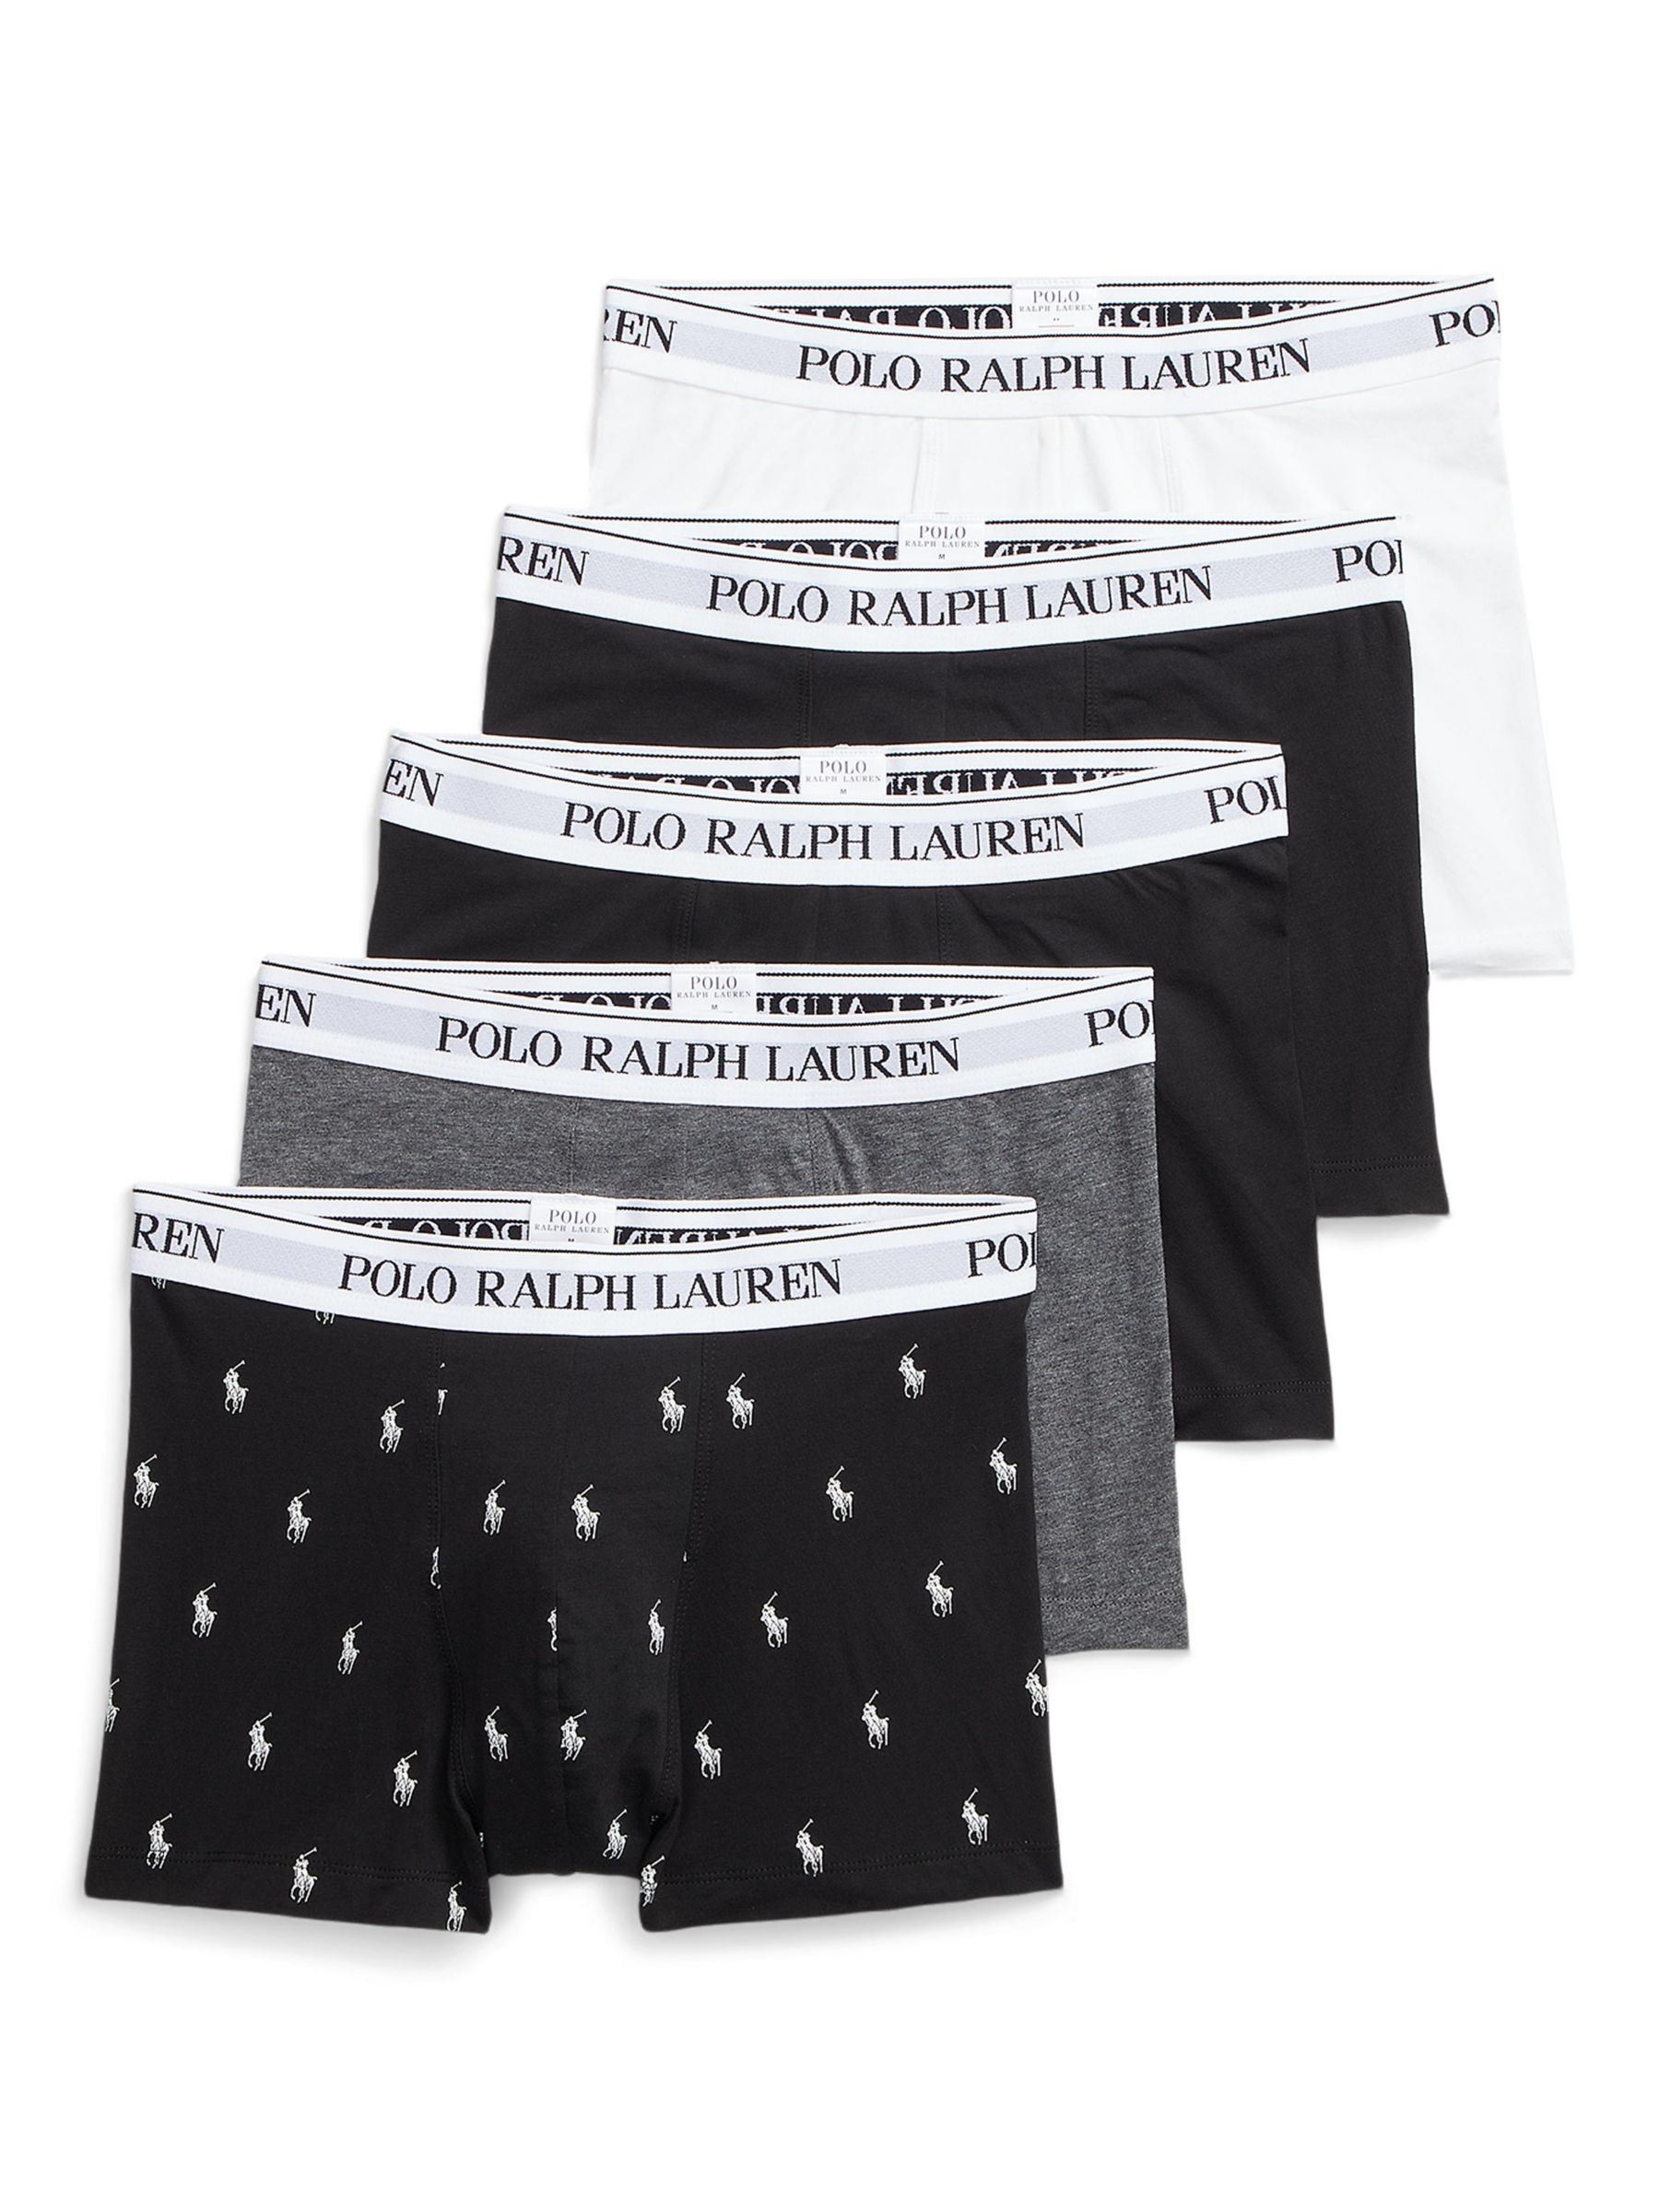 Polo Ralph Lauren Stretch Classic Fit Boxer Briefs - Small - Gray - 2 Pair